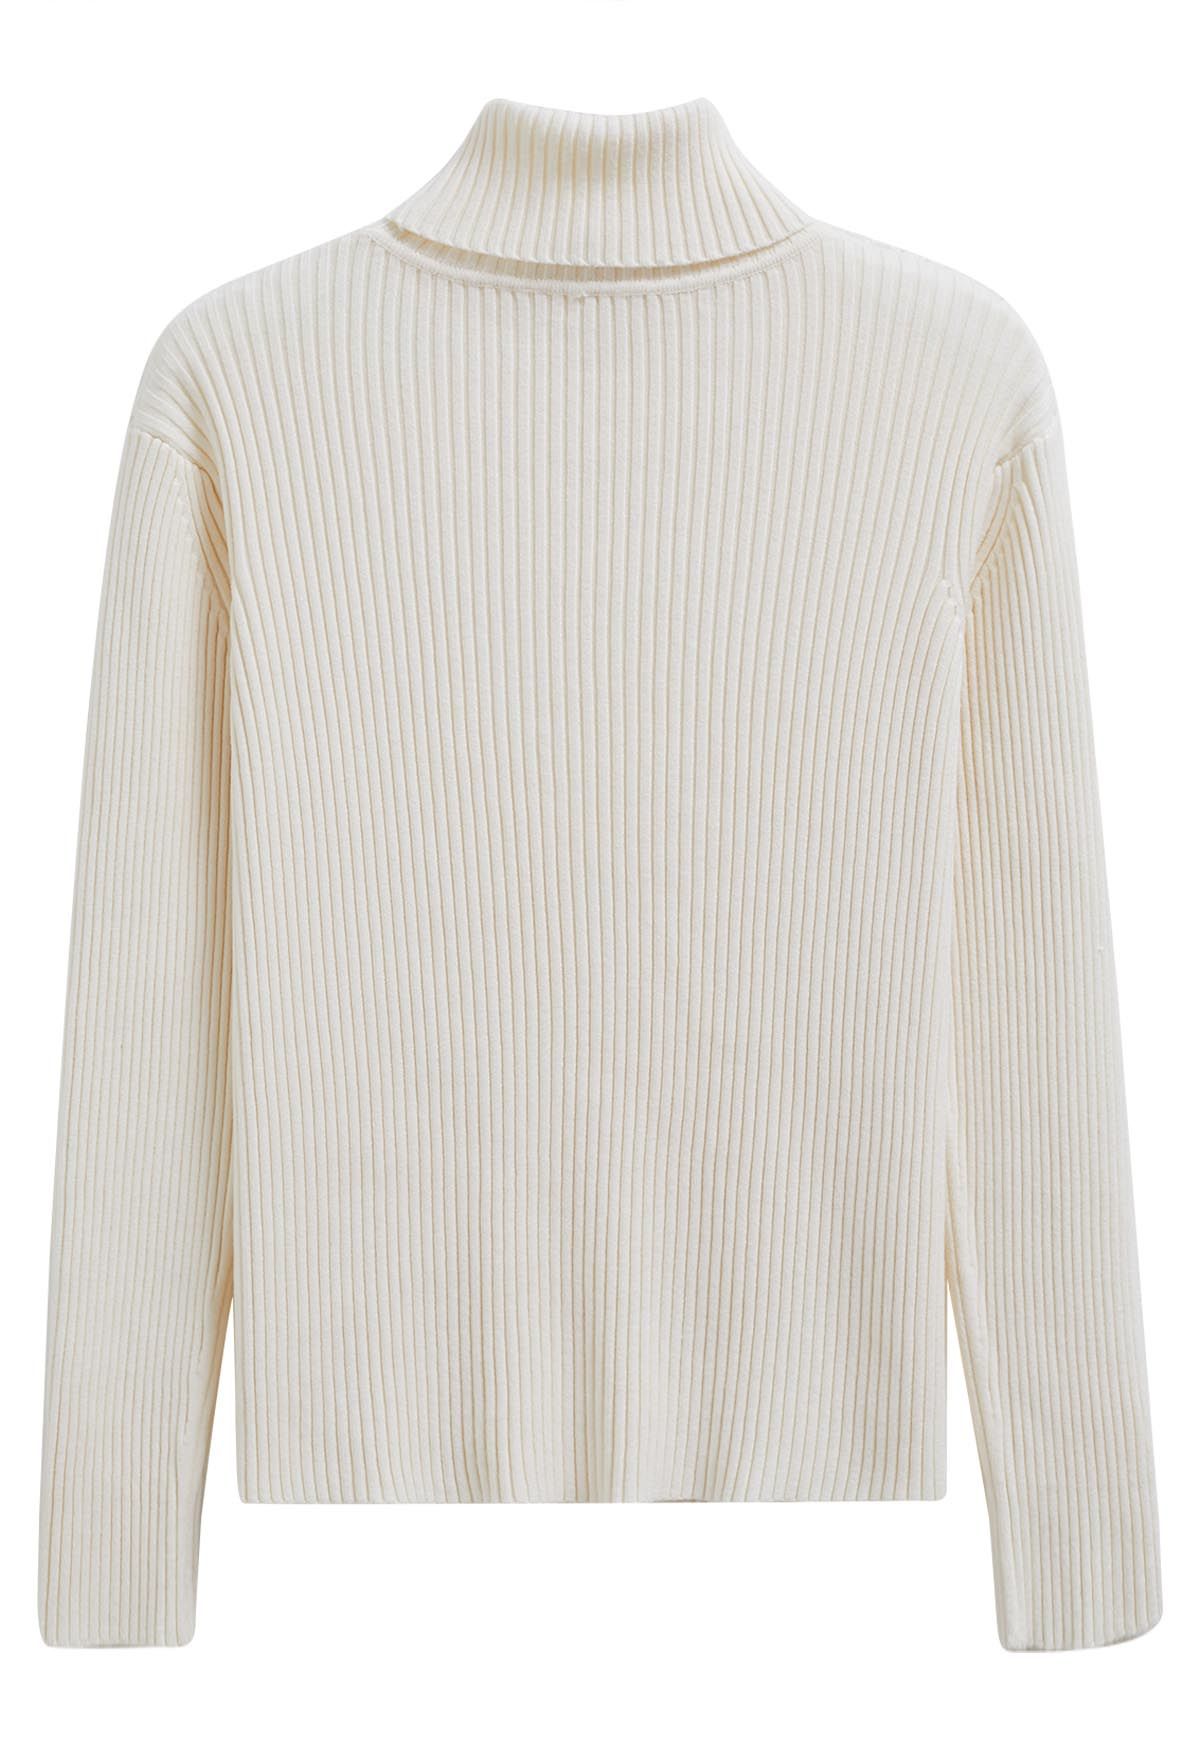 Versatile Turtleneck Ribbed Knit Sweater in Ivory